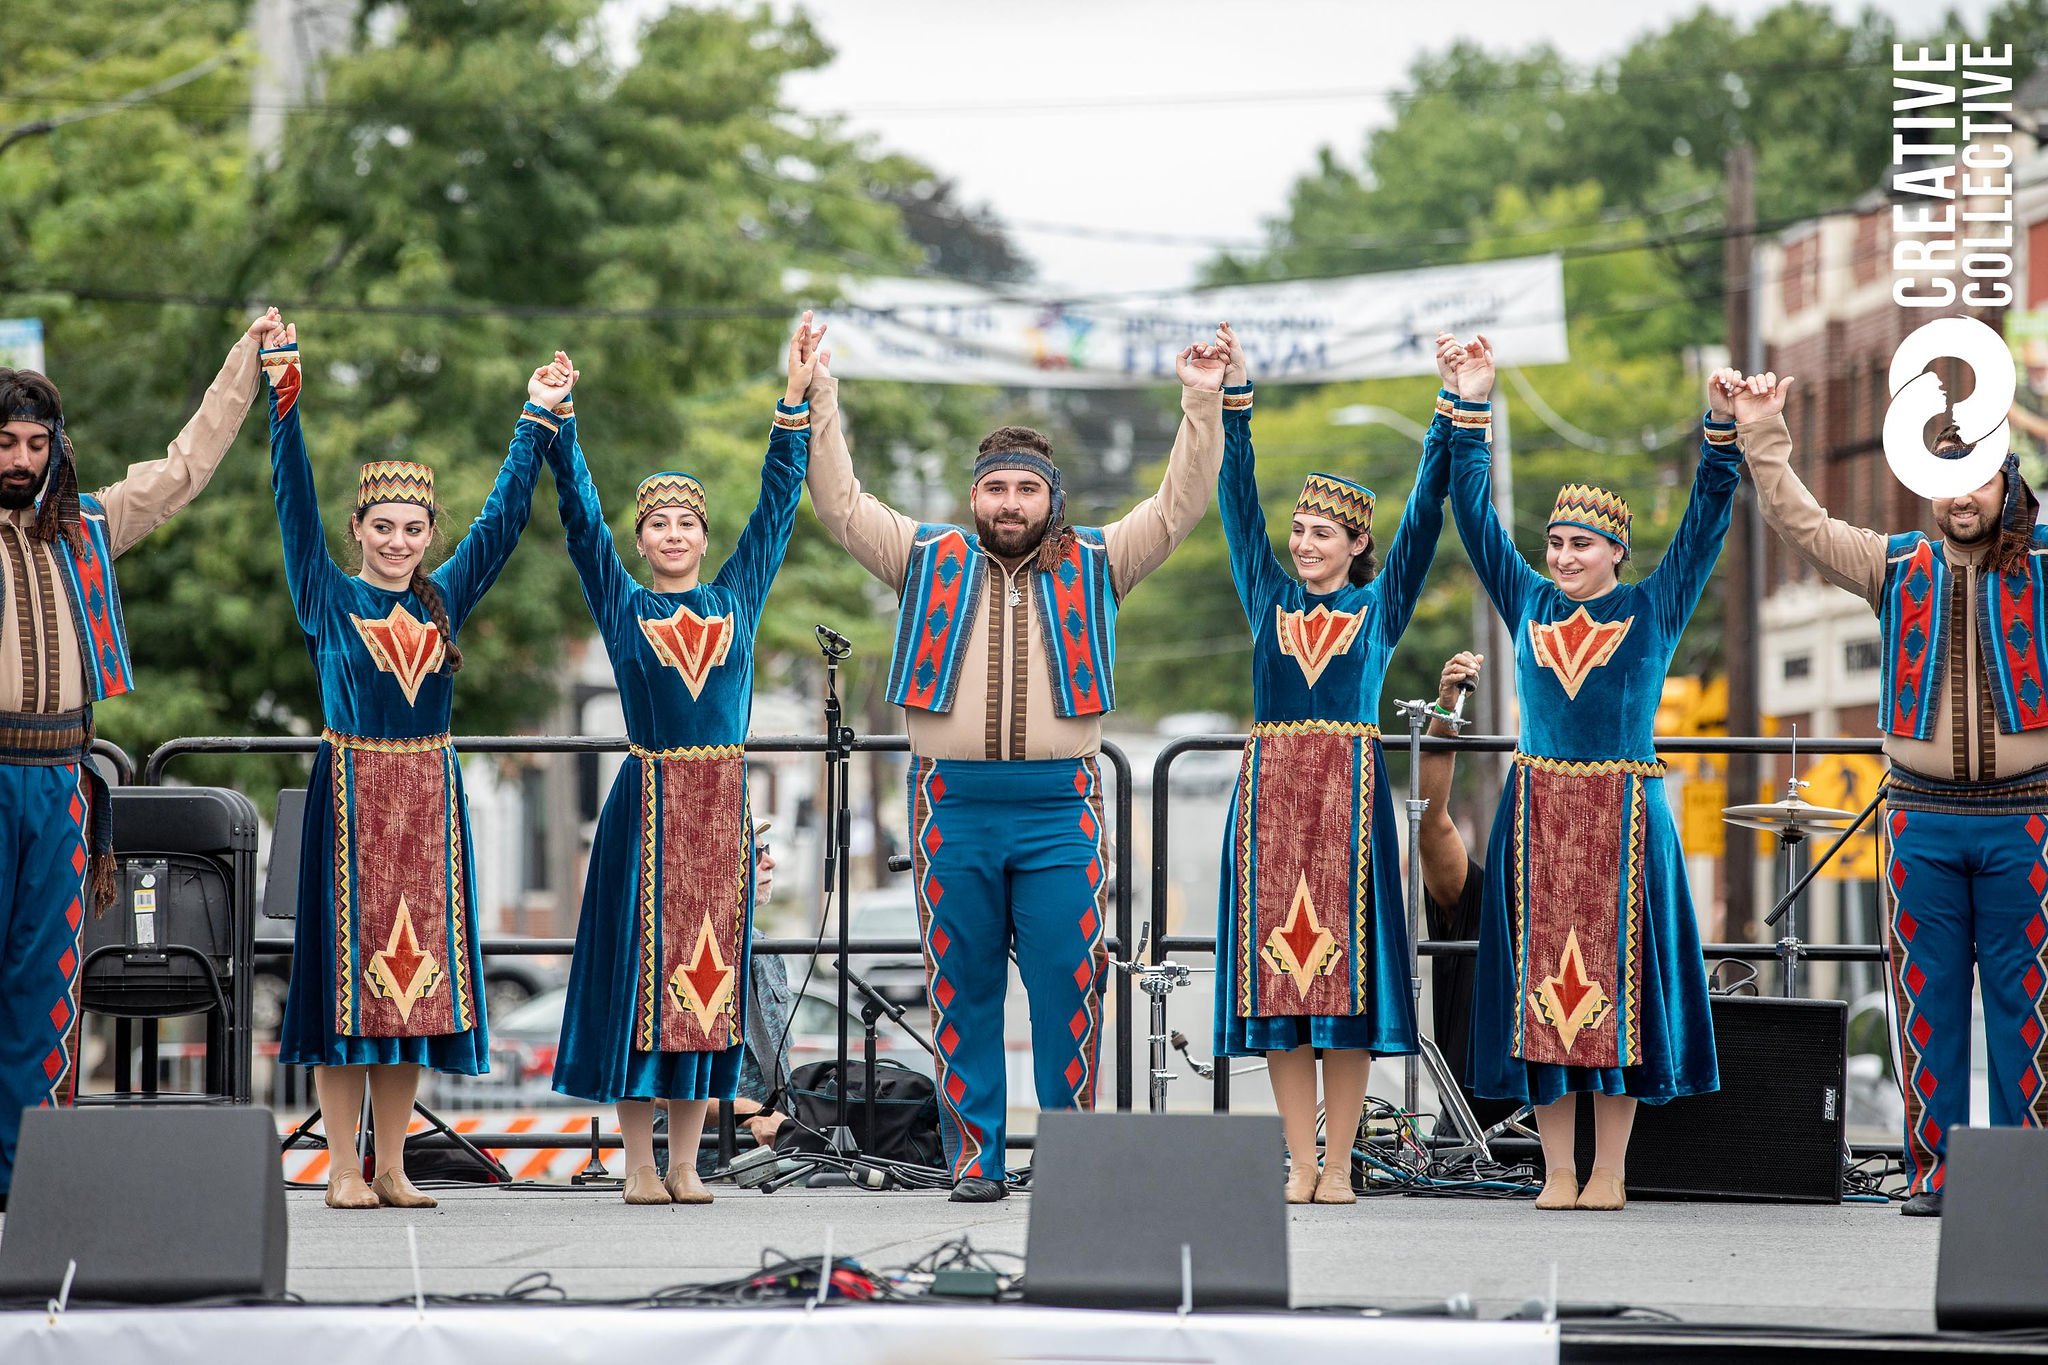 a group of 5 performers in elaborate blue traditional clothing hold hands with arms up at the end of a performance on stage at the peabody international festival 